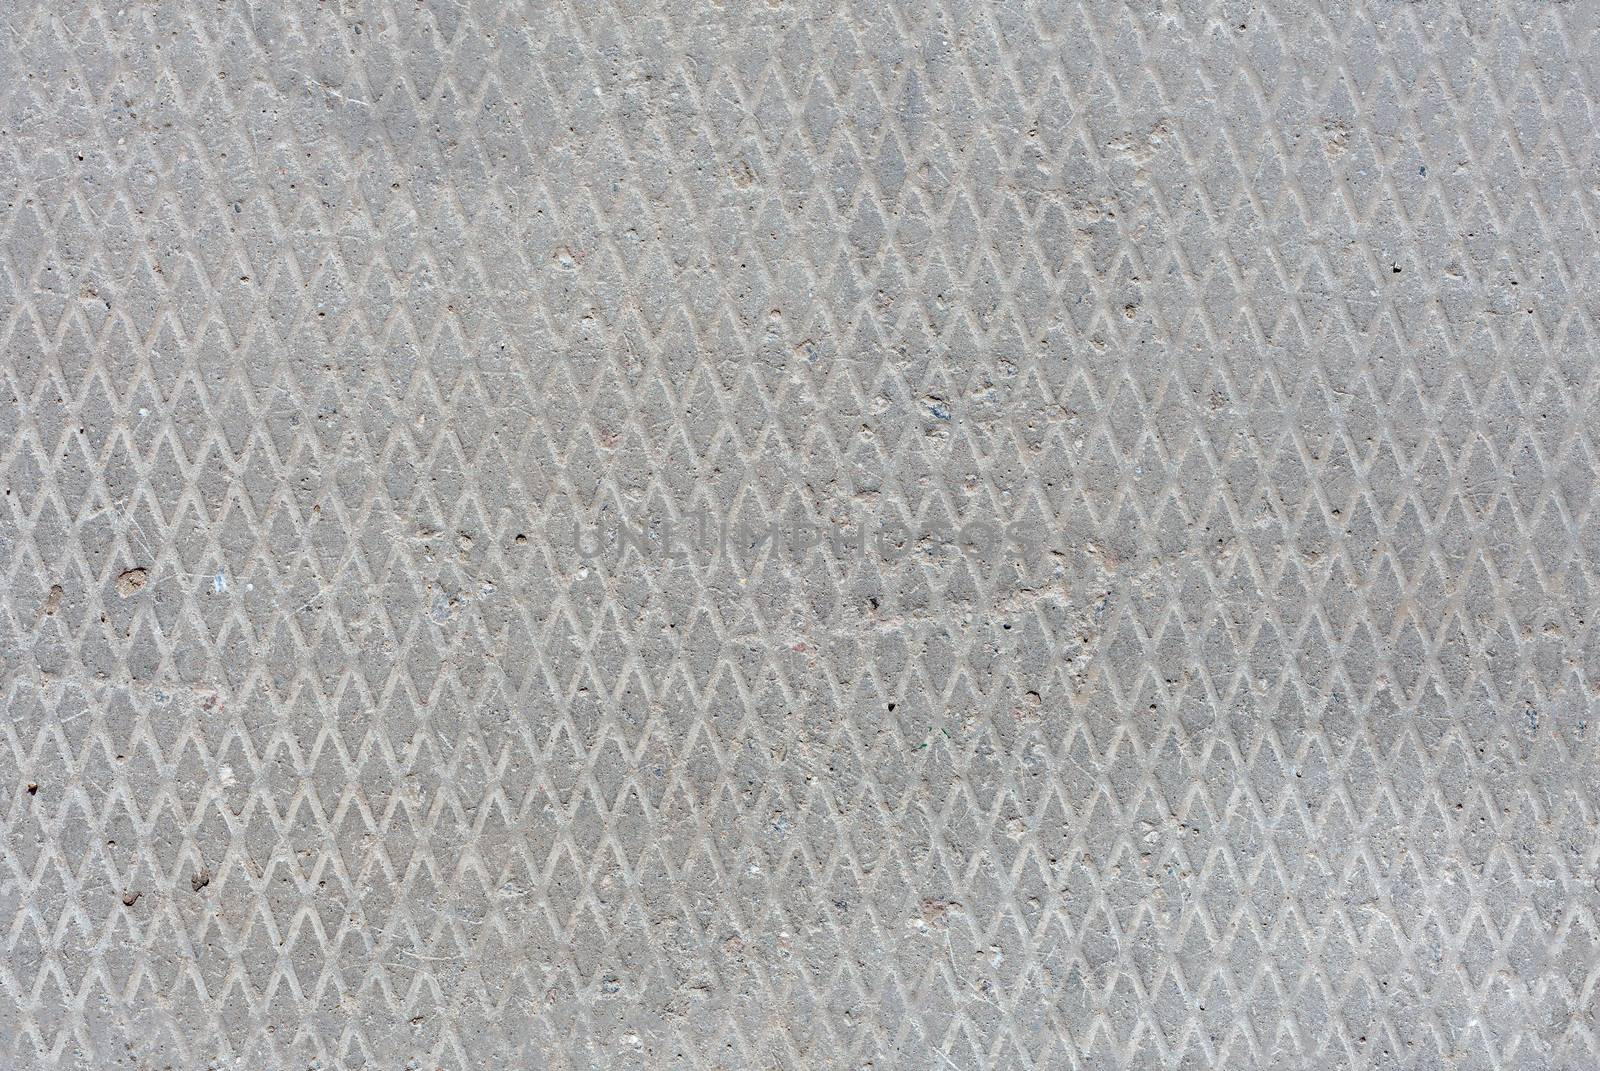 seamless old flat concrete texture with diamond pattern and signs of light erosion.